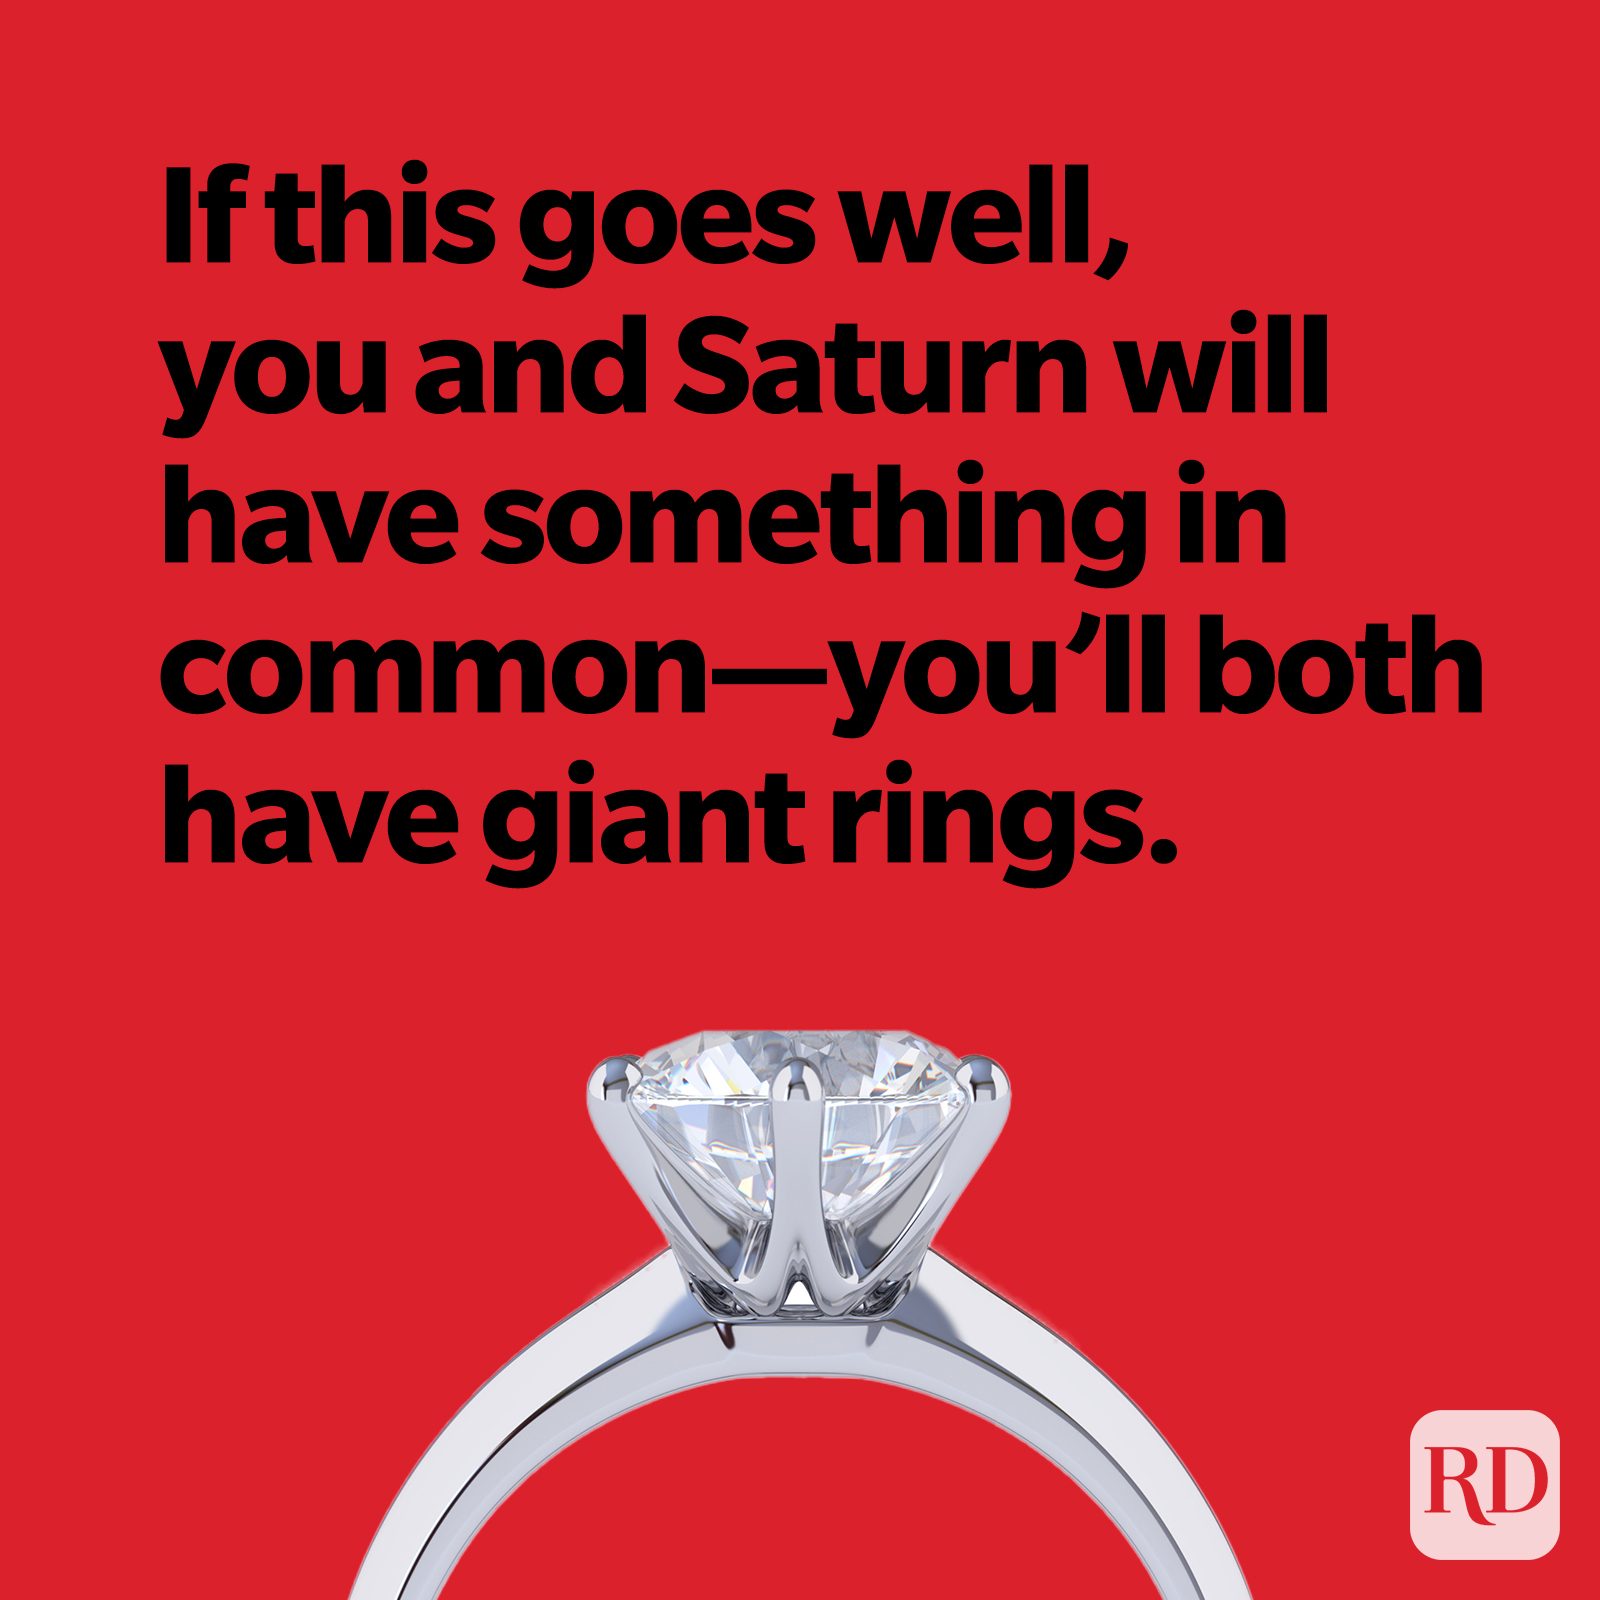 If this goes well, you and Saturn will have something in common—you'll both have giant rings.